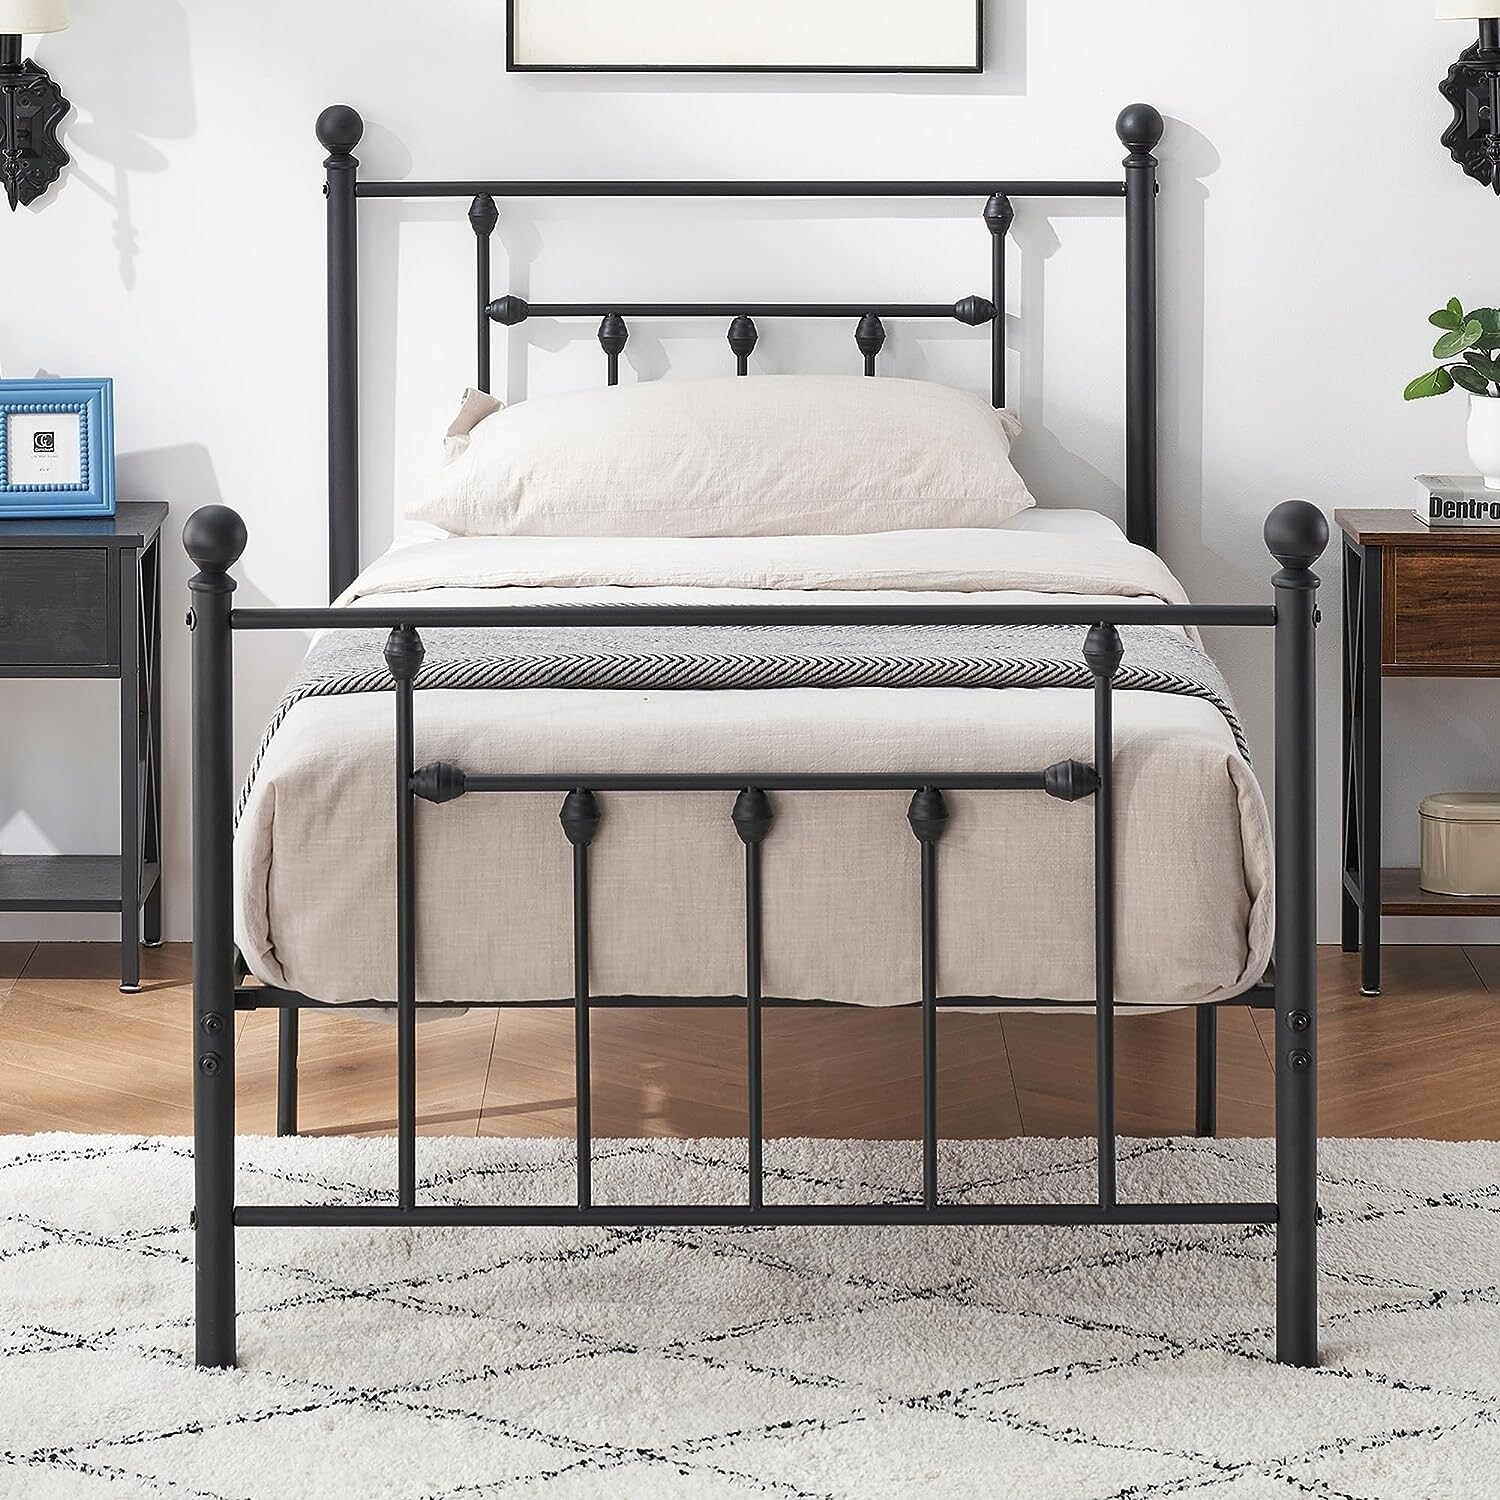 https://ak1.ostkcdn.com/images/products/is/images/direct/acc9abaf389ac6e62bca3a516823096a0221a135/VECELO-Platform-Bed-Frame-with-Headboard-Twin-Full-Queen-Size-Bed.jpg